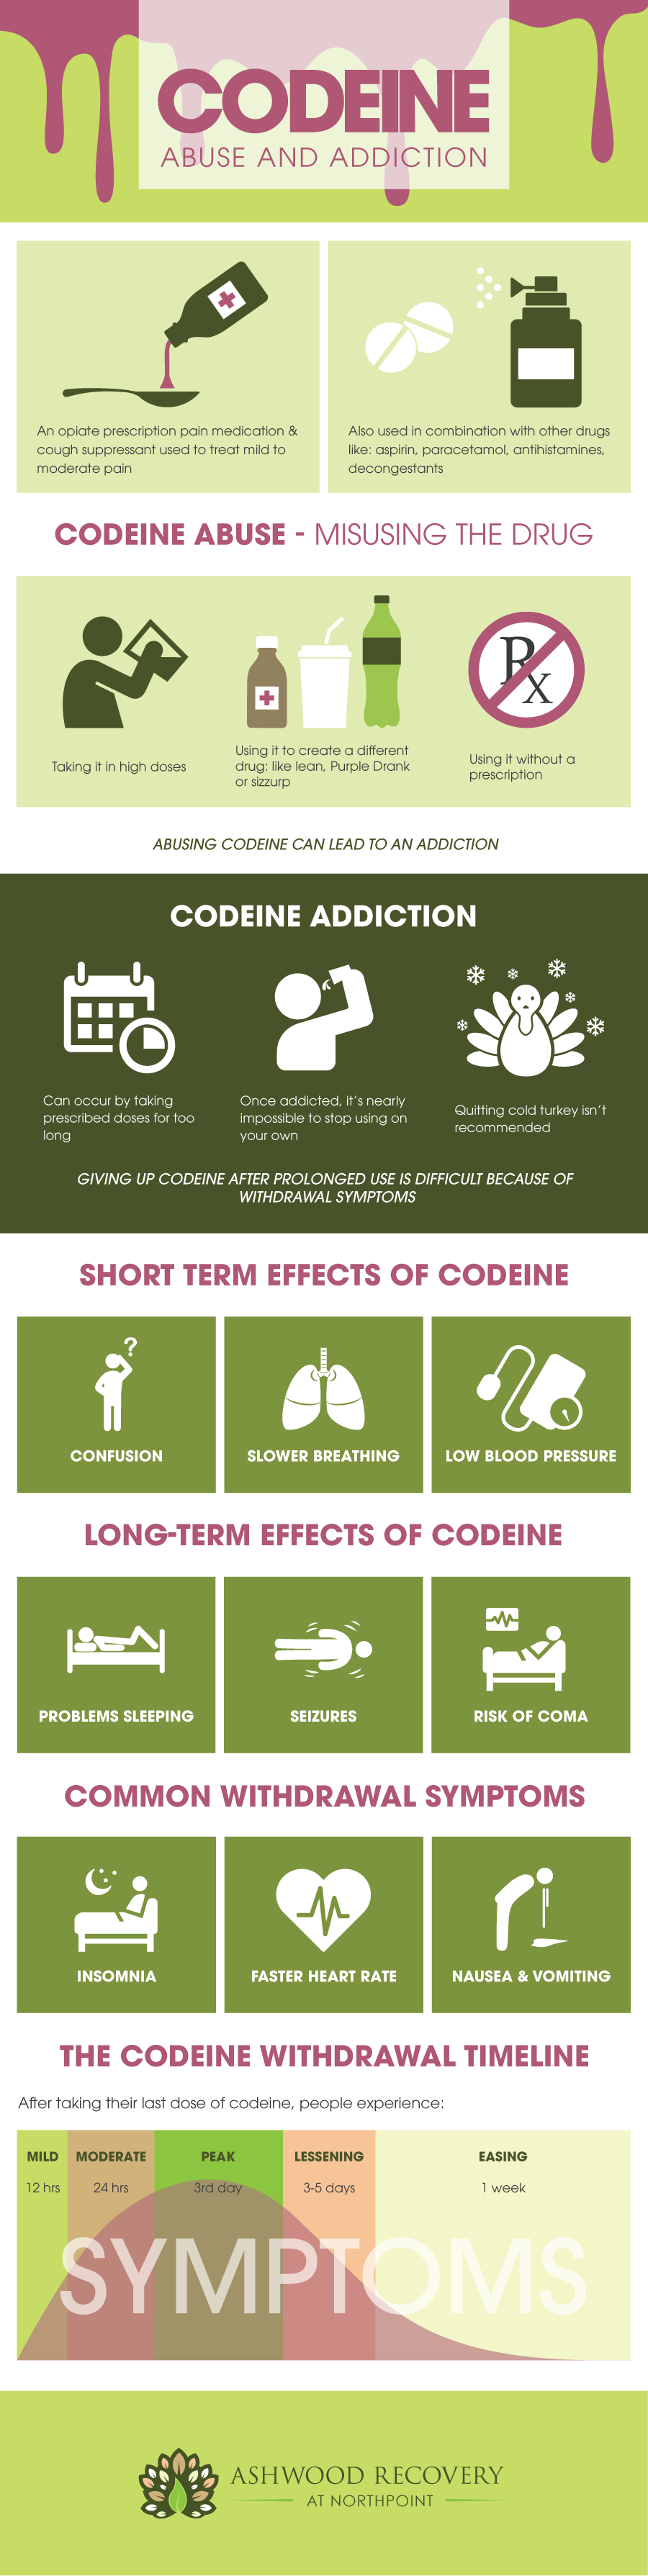 Codeine is an opiate prescription pain medication and cough suppressant used to treat mild to moderate pain, codeine is also used in combination with other drugs like aspirin, paracetamol, antihistamines and decongestants. Signs of codeine abuse includes taking codeine in high doses, using codeine to create a different drug like lean, purple drank or sizzurp and using codeine without a prescription, abusing codeine cand lead to an addiction. Codeine addiction can occur by taking prescribed doses for too long, once addicted, it is nearly impossible to stop using on your own, quitting cold turkey is not recommended, giving up codeine after prolonged use is difficult because of withdrawal symptoms. Short term effects of codeine includes confusion, slower breathing and low blood pressure. Long term effects of codeine includes problems sleeping, seizures and risk of coma. Common withdrawal symptoms of codeine includes insomnia, faster heart rate and nausea and vomiting. After taking their last dose of codeine, pleople experience symptoms in an increasing intensity. first the symptoms are mild this intensity lasts 12 hours, then follows moderate intensity which lasts 24 hours, then follows peak intensity which occurs in the third day of withdrawal symptoms, then follows lessening intensity which lasts 3 to 5 days and the finally follows easing intensity and the symptoms in this intensity lasts 1 week